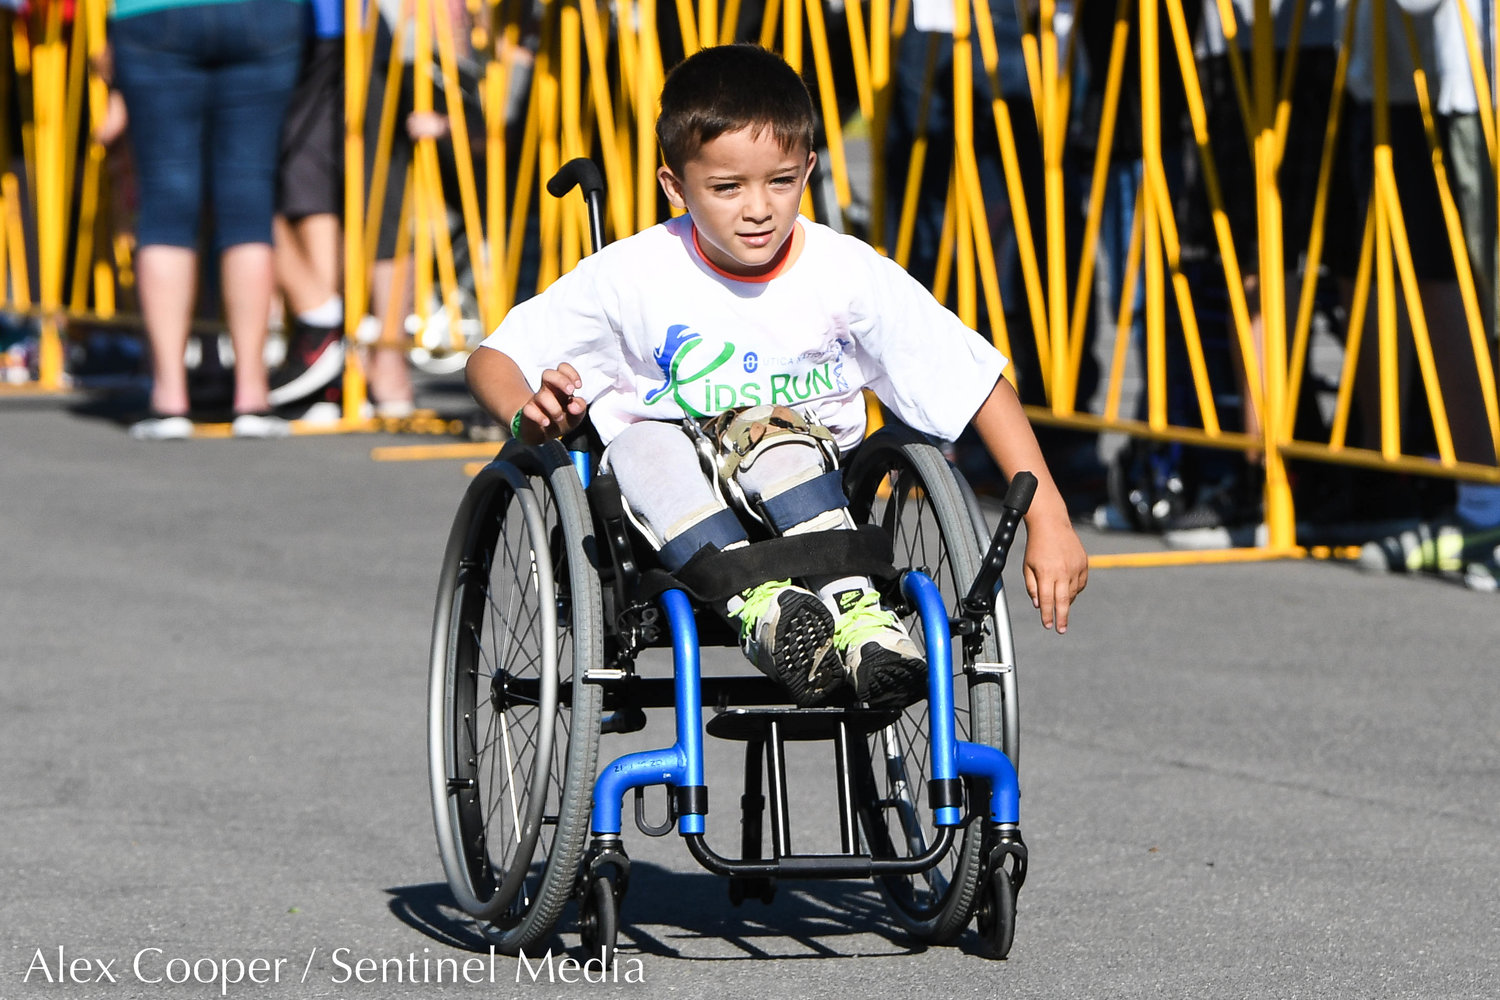 A young boy participates in the Utica National Kids Run at Mohawk Valley Community College in Utica on Saturday.